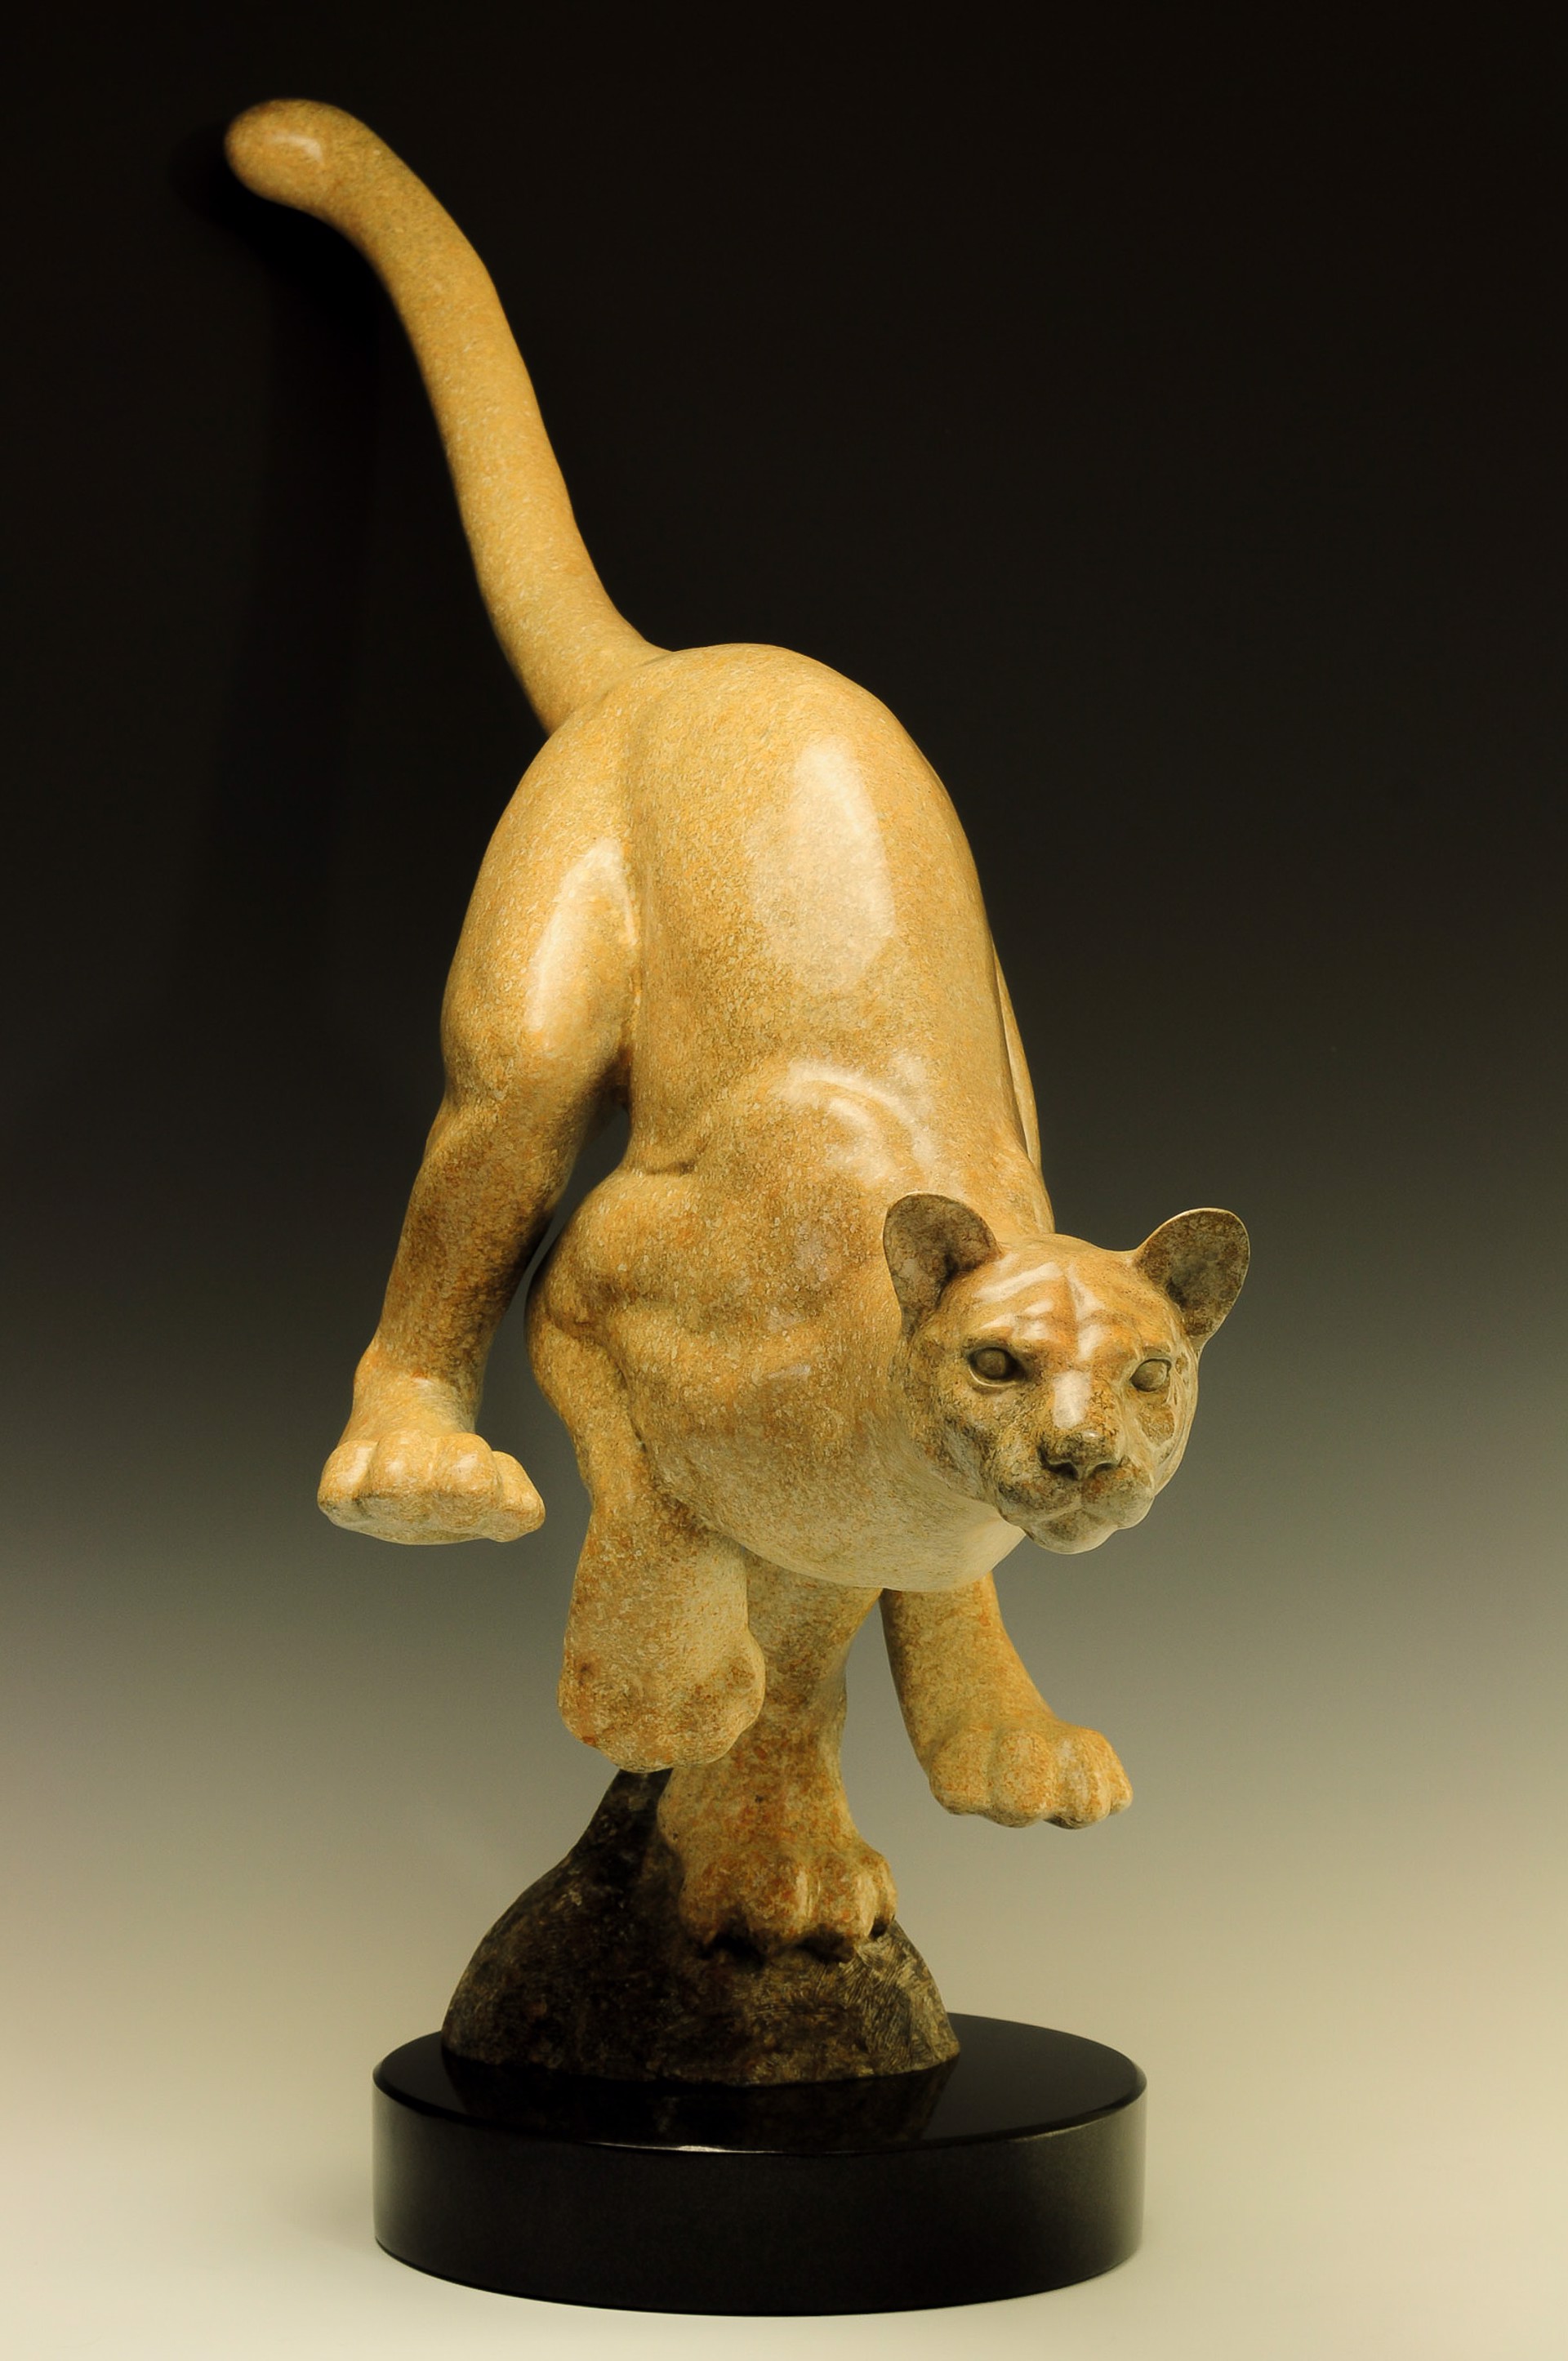 A Fine Art Sculpture In Bronze By Jeremy Bradshaw Featuring A Pouncing Mountain Lion, Available At Gallery Wild